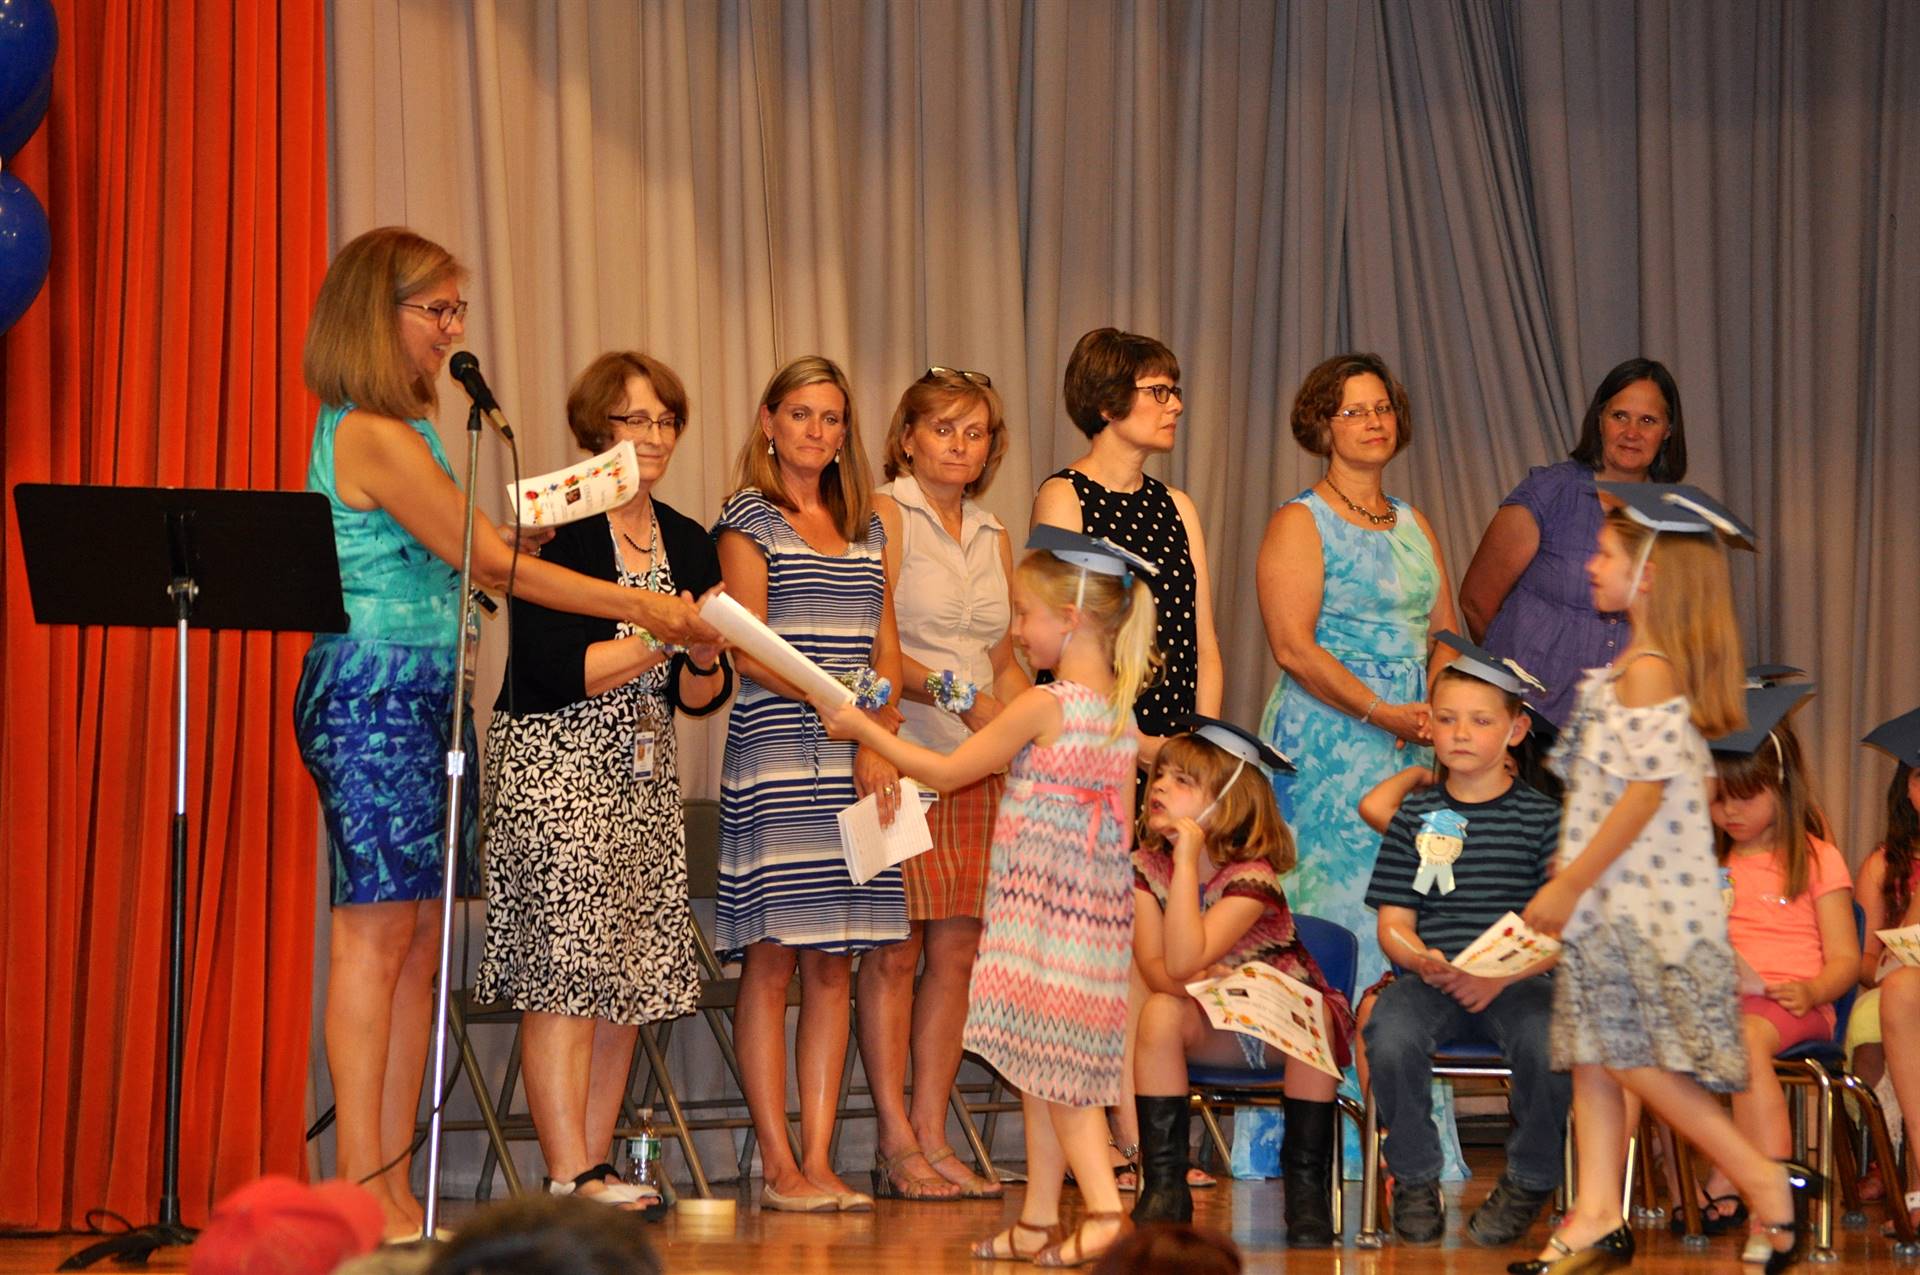 First graders receive their certificates of graduation!